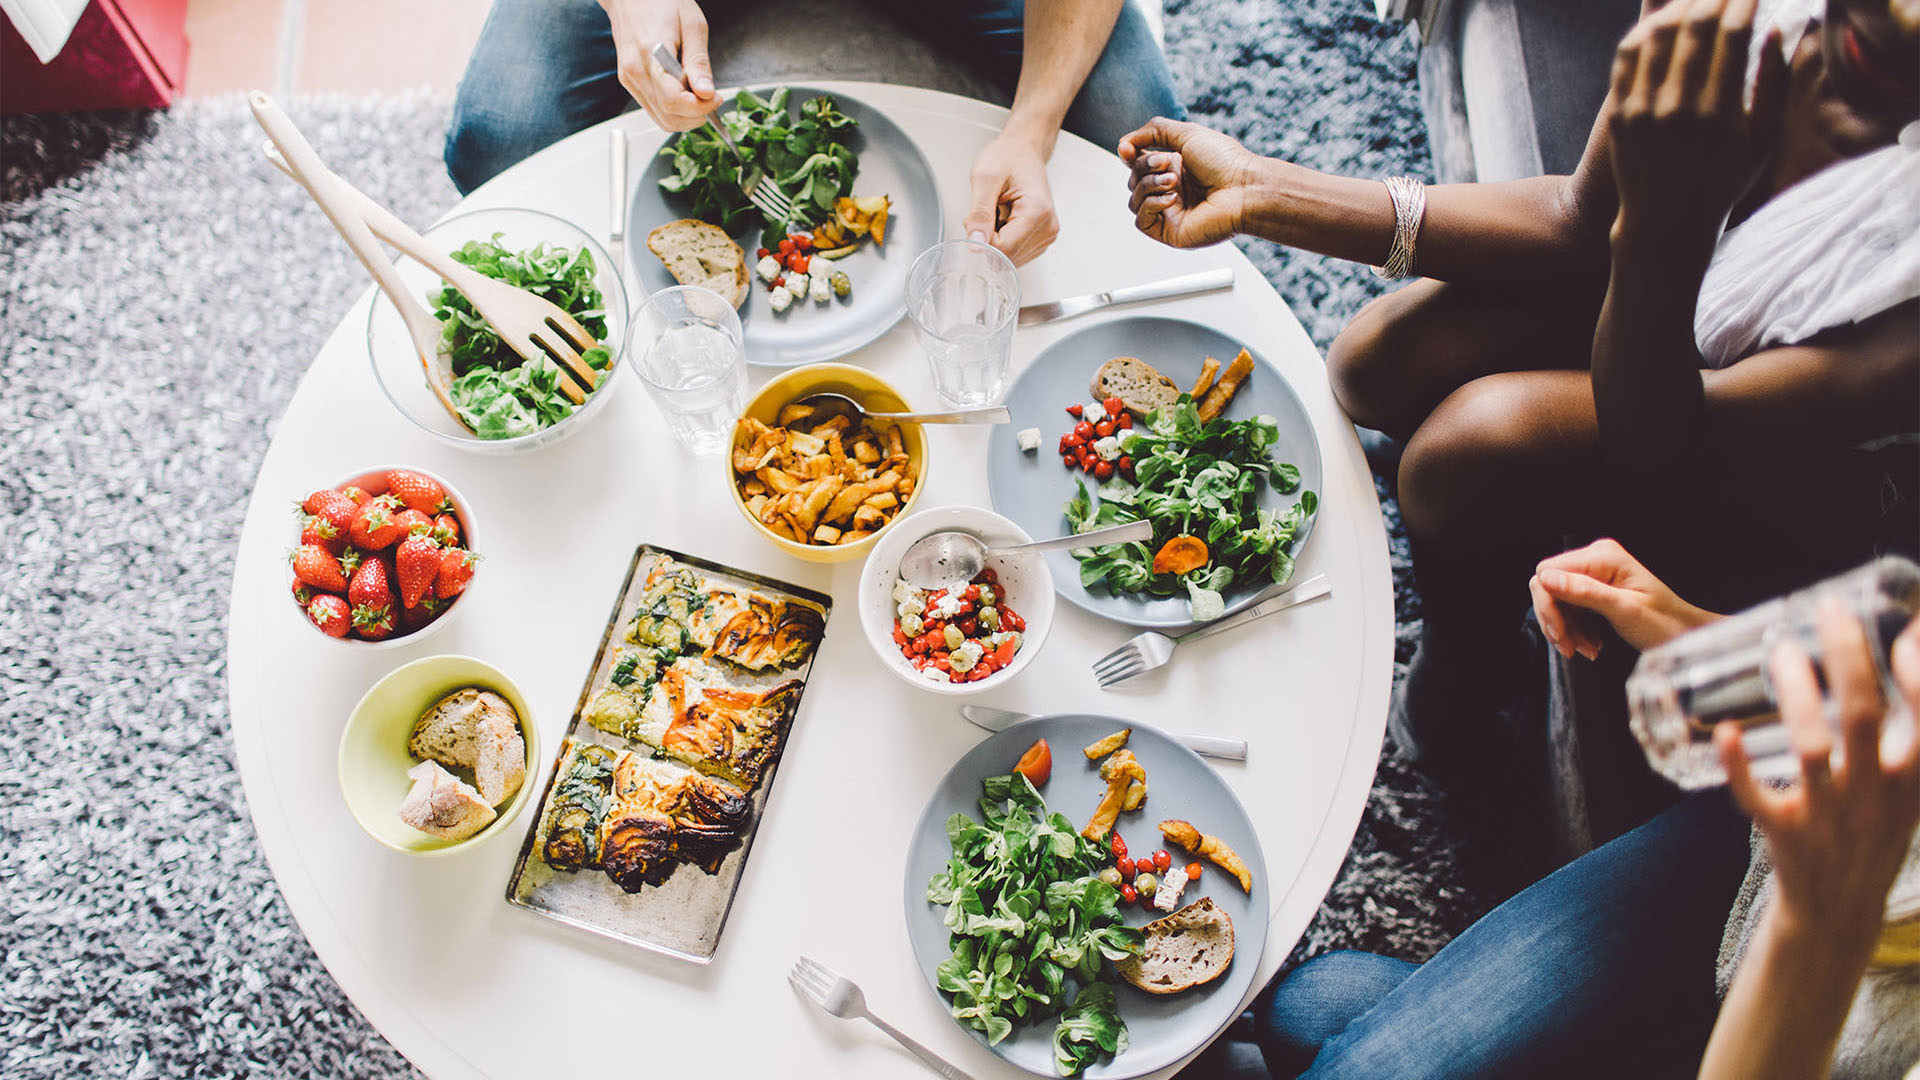 Article, How to Counsel Someone New to Plant-Based Eating